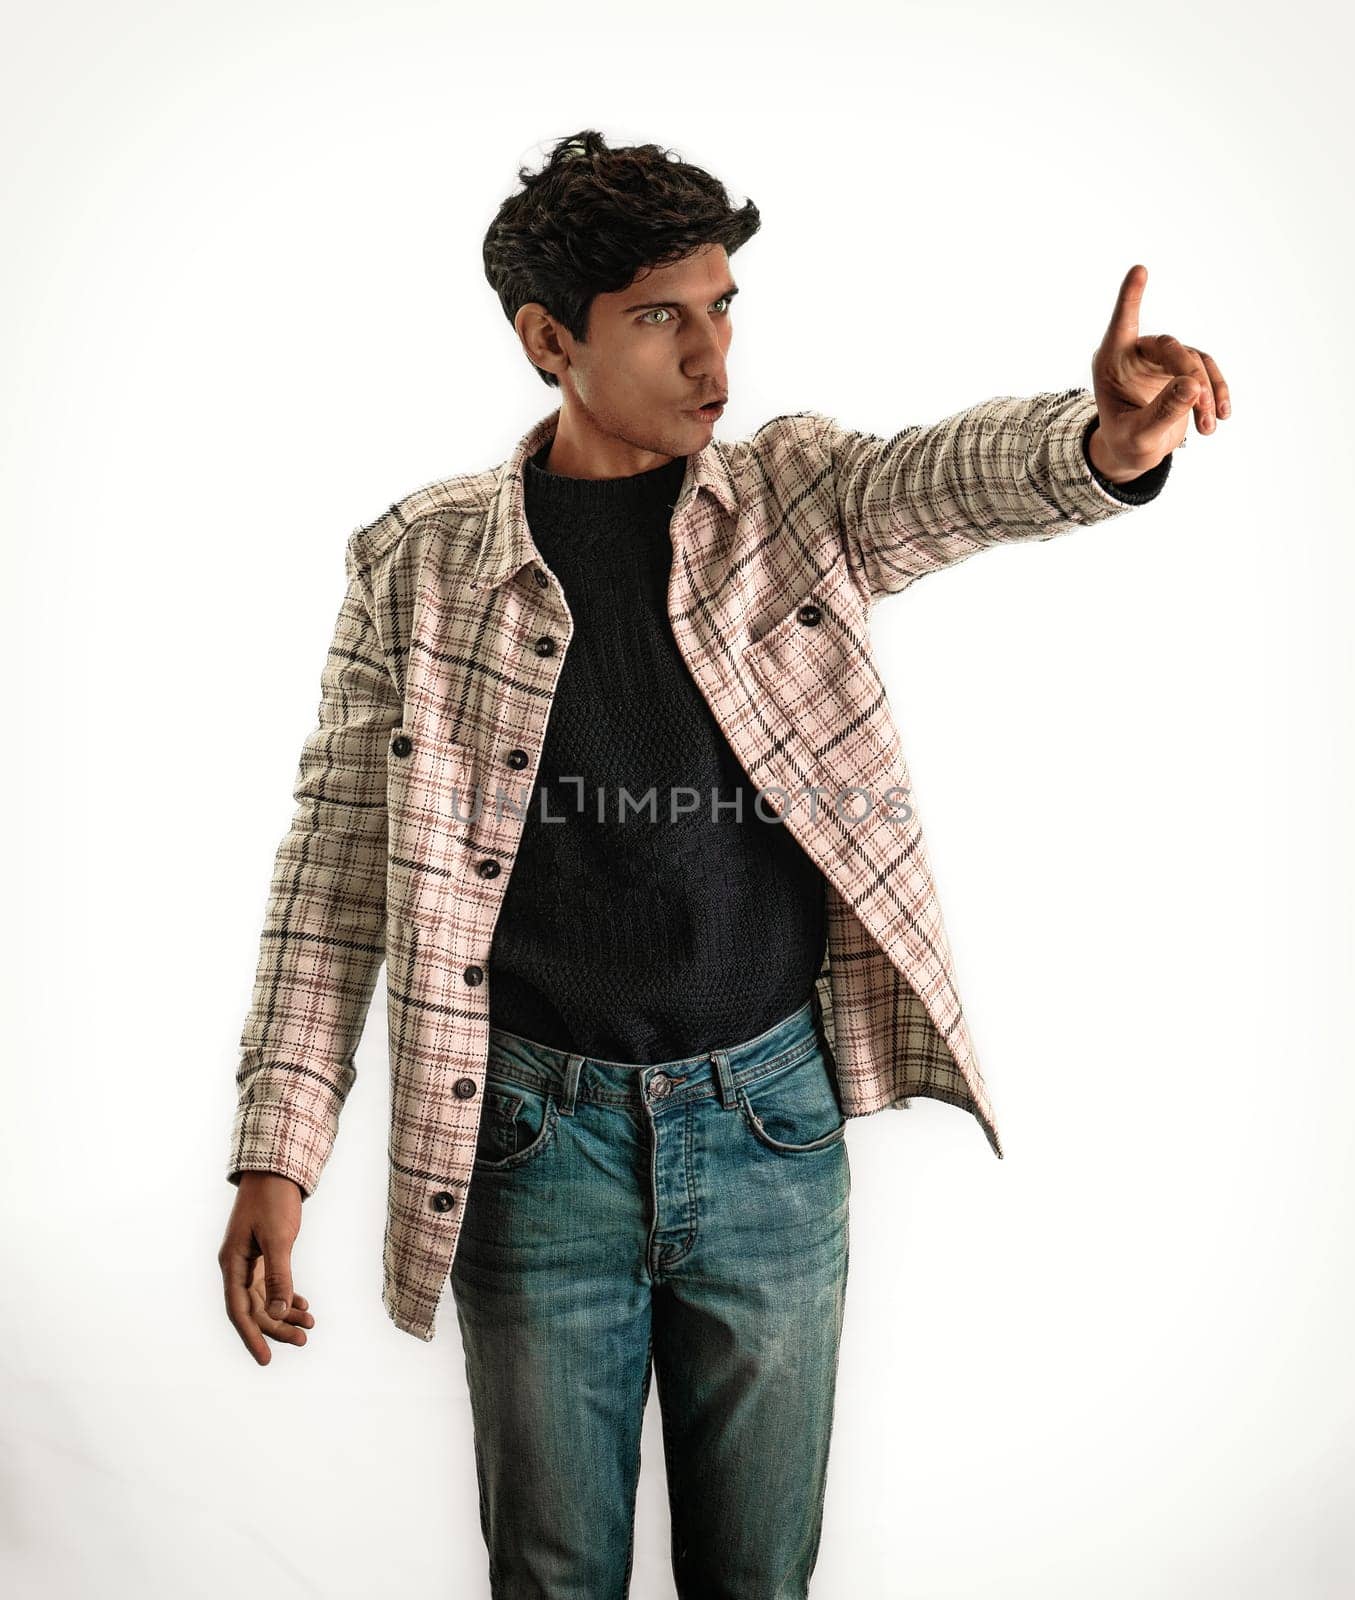 A man in a plaid jacket saying No with a hand gesture, in studio shot on white background